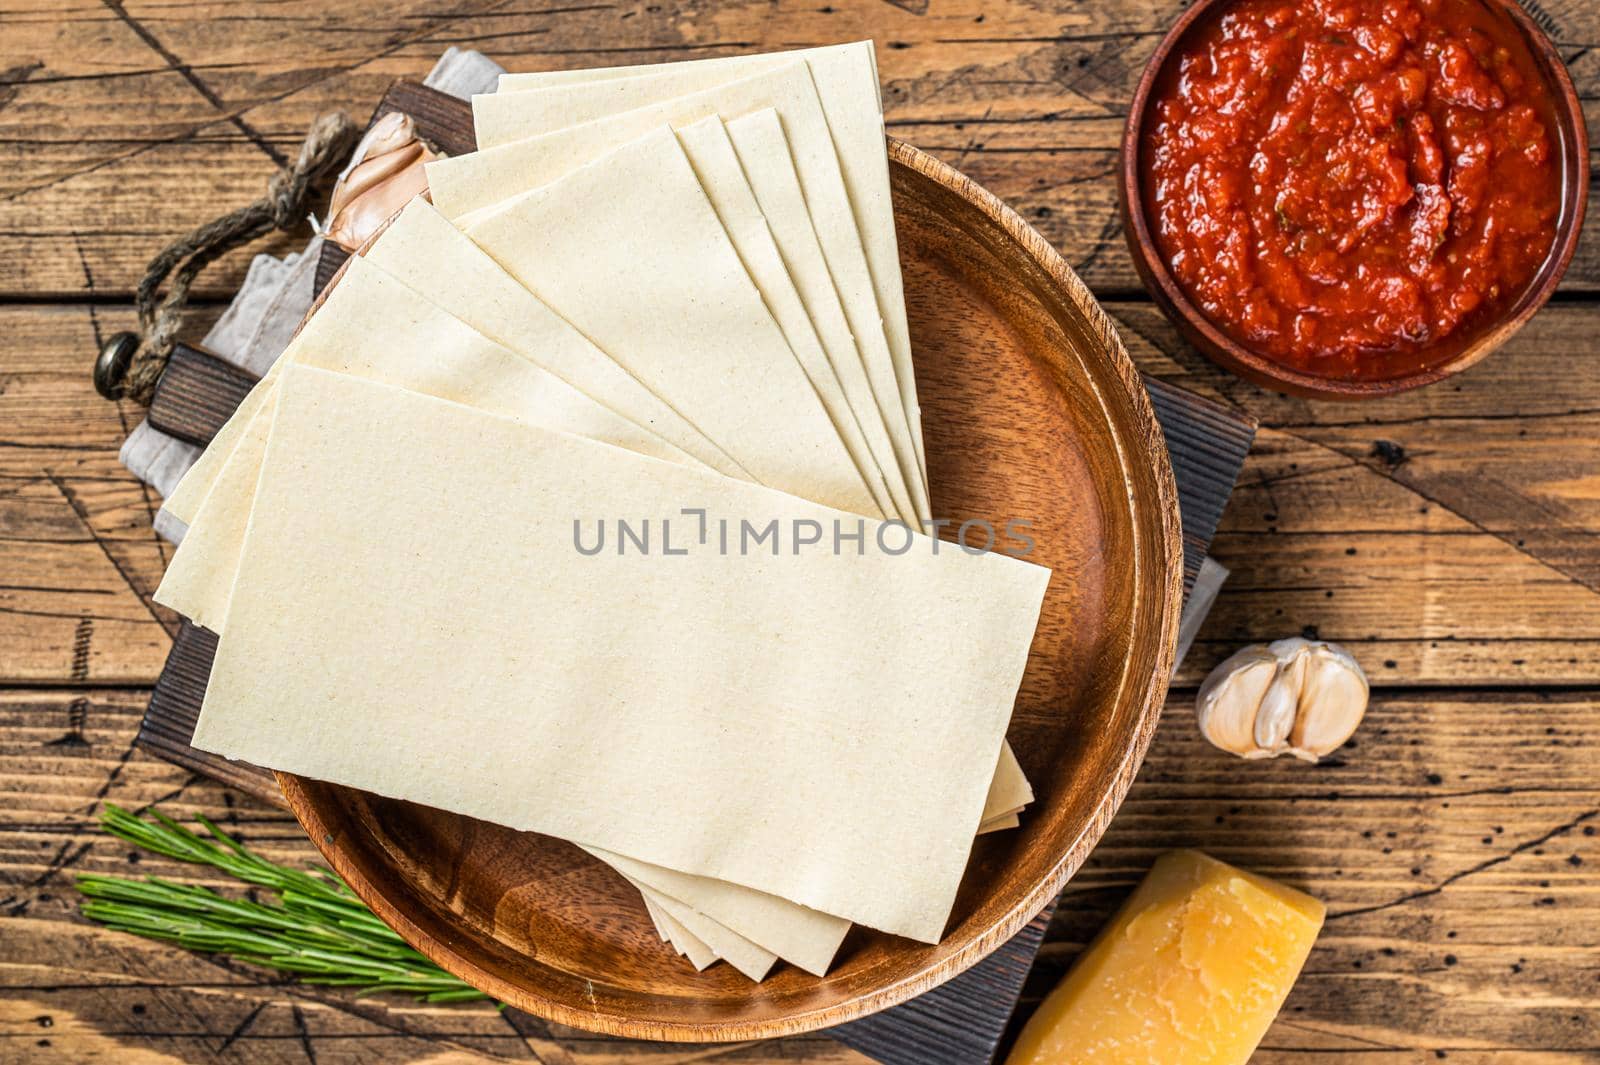 Set of ingredients for cooking lasagna close-up of Tomato sauce, pasta, cheese. wooden background. Top view.